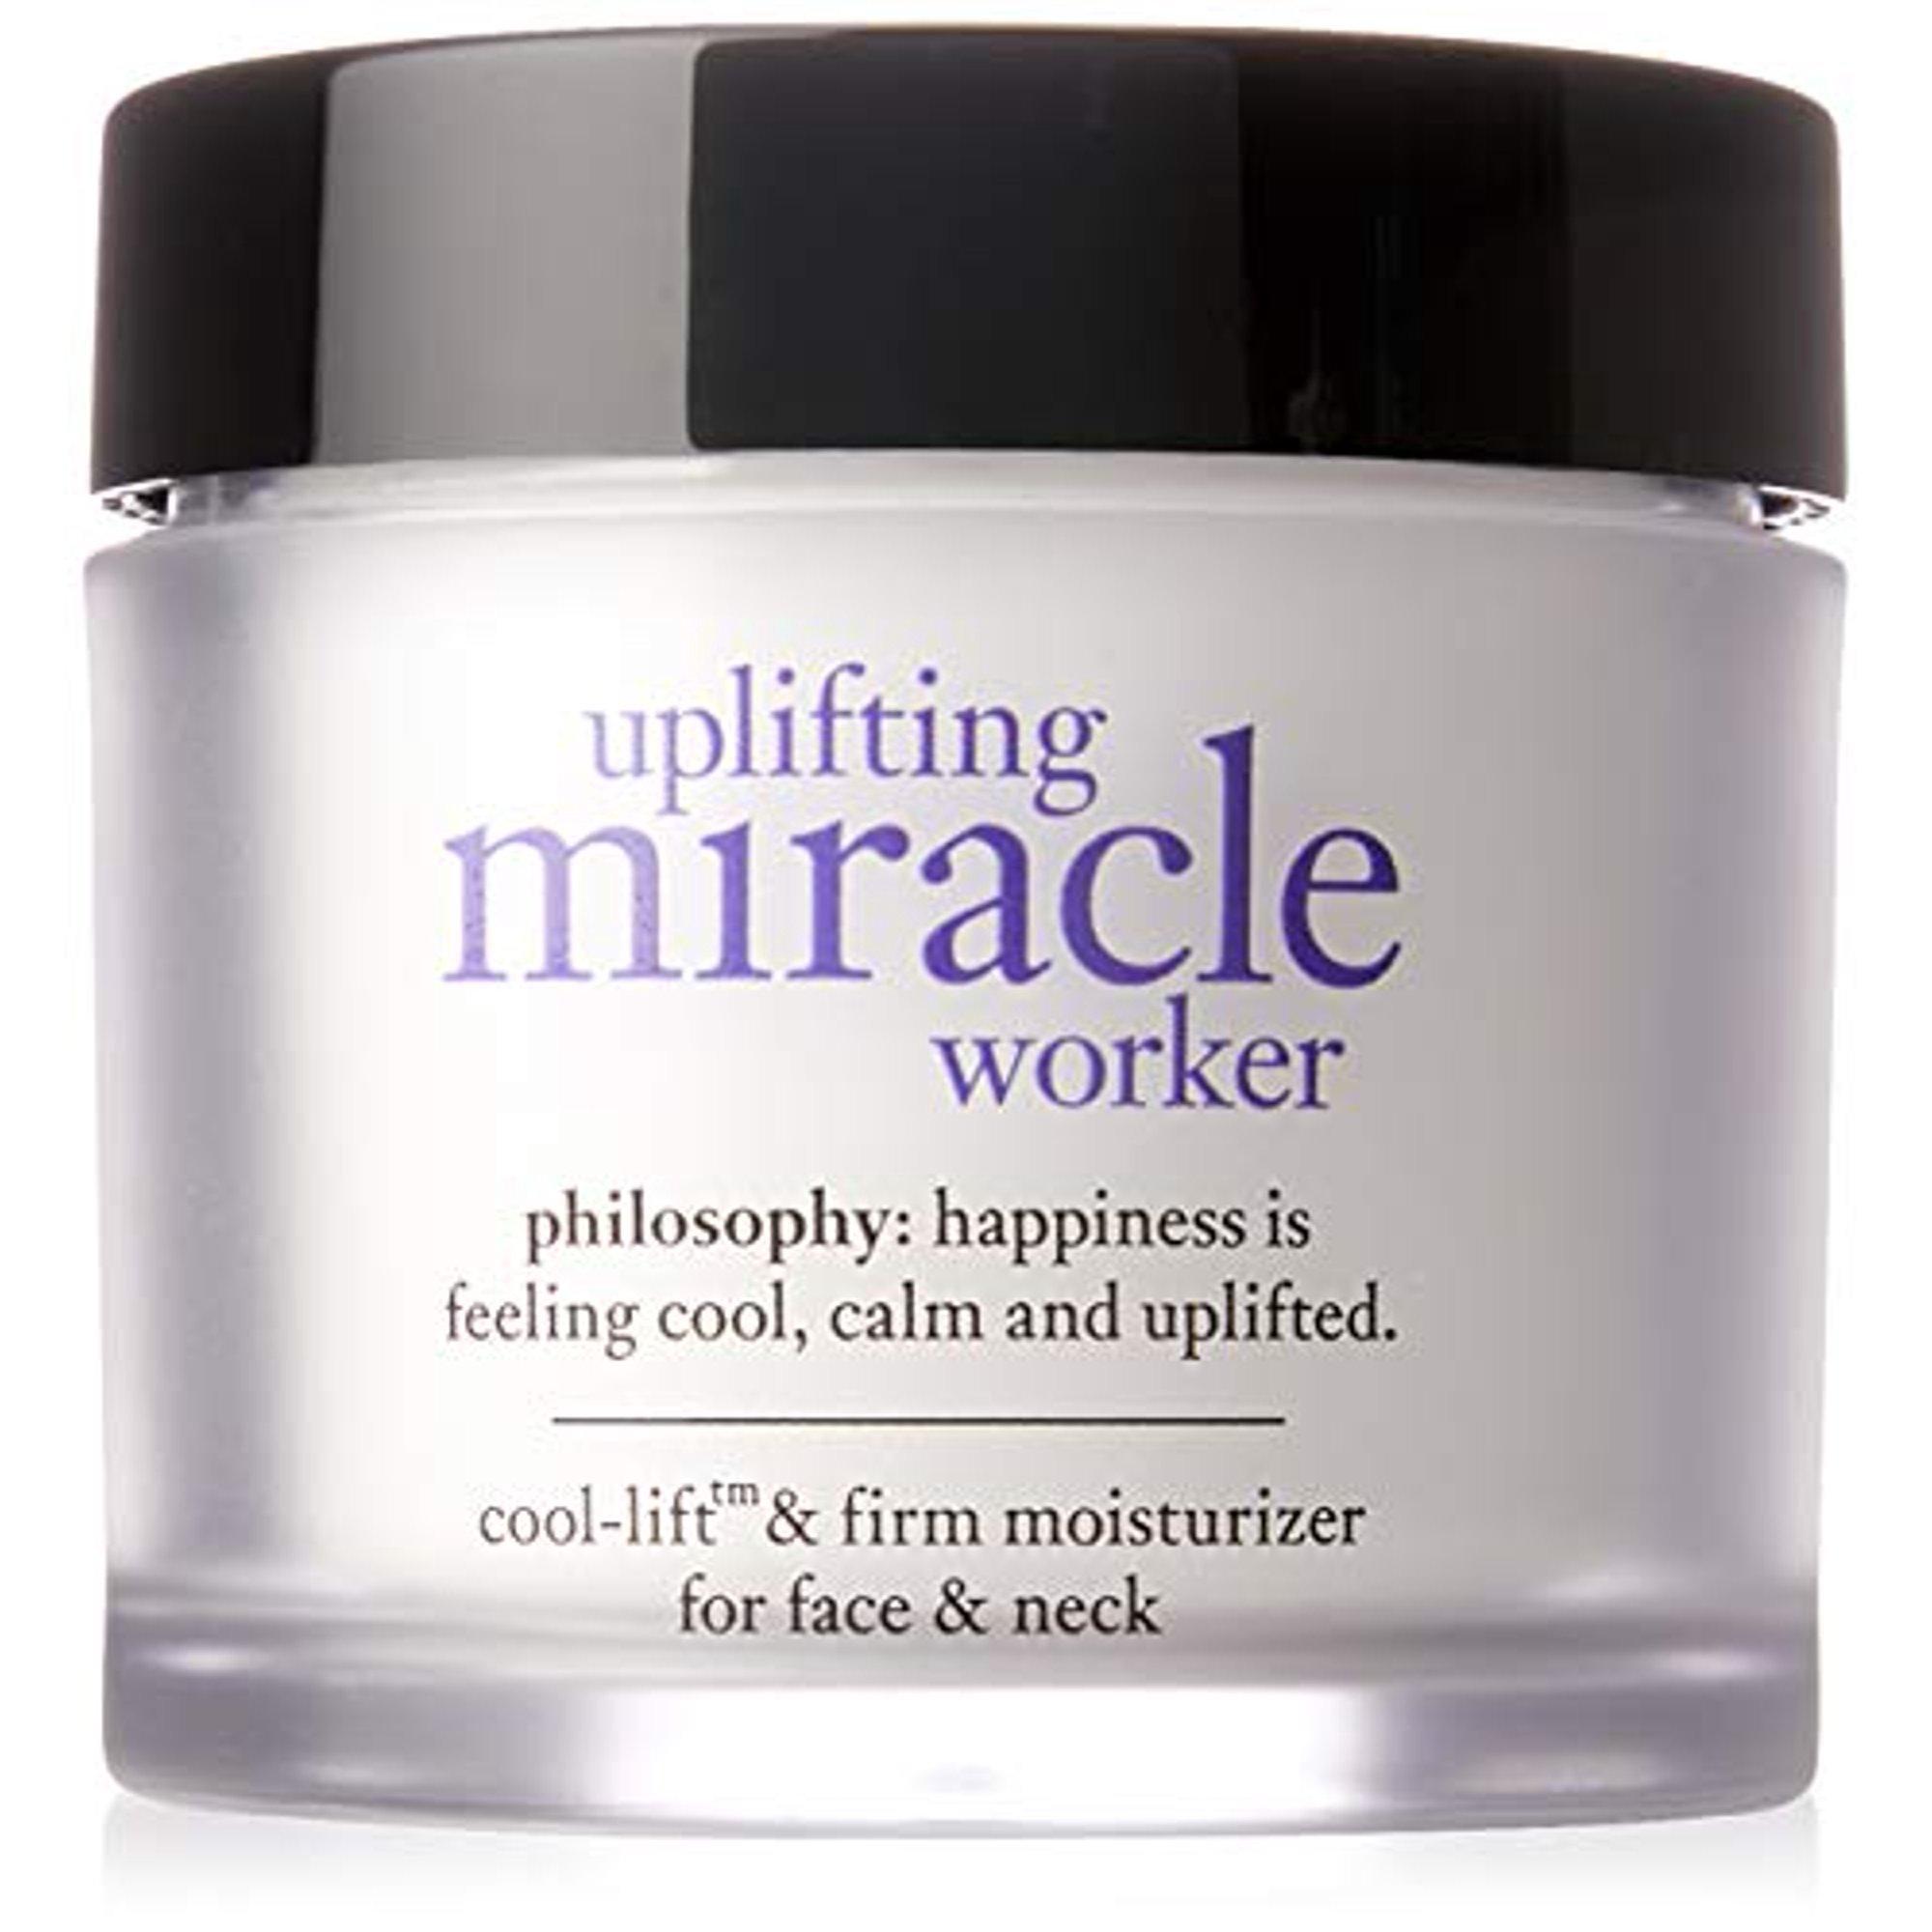 uplifting miracle worker moisturizer cool-lift & firm moisturizer for face & neck